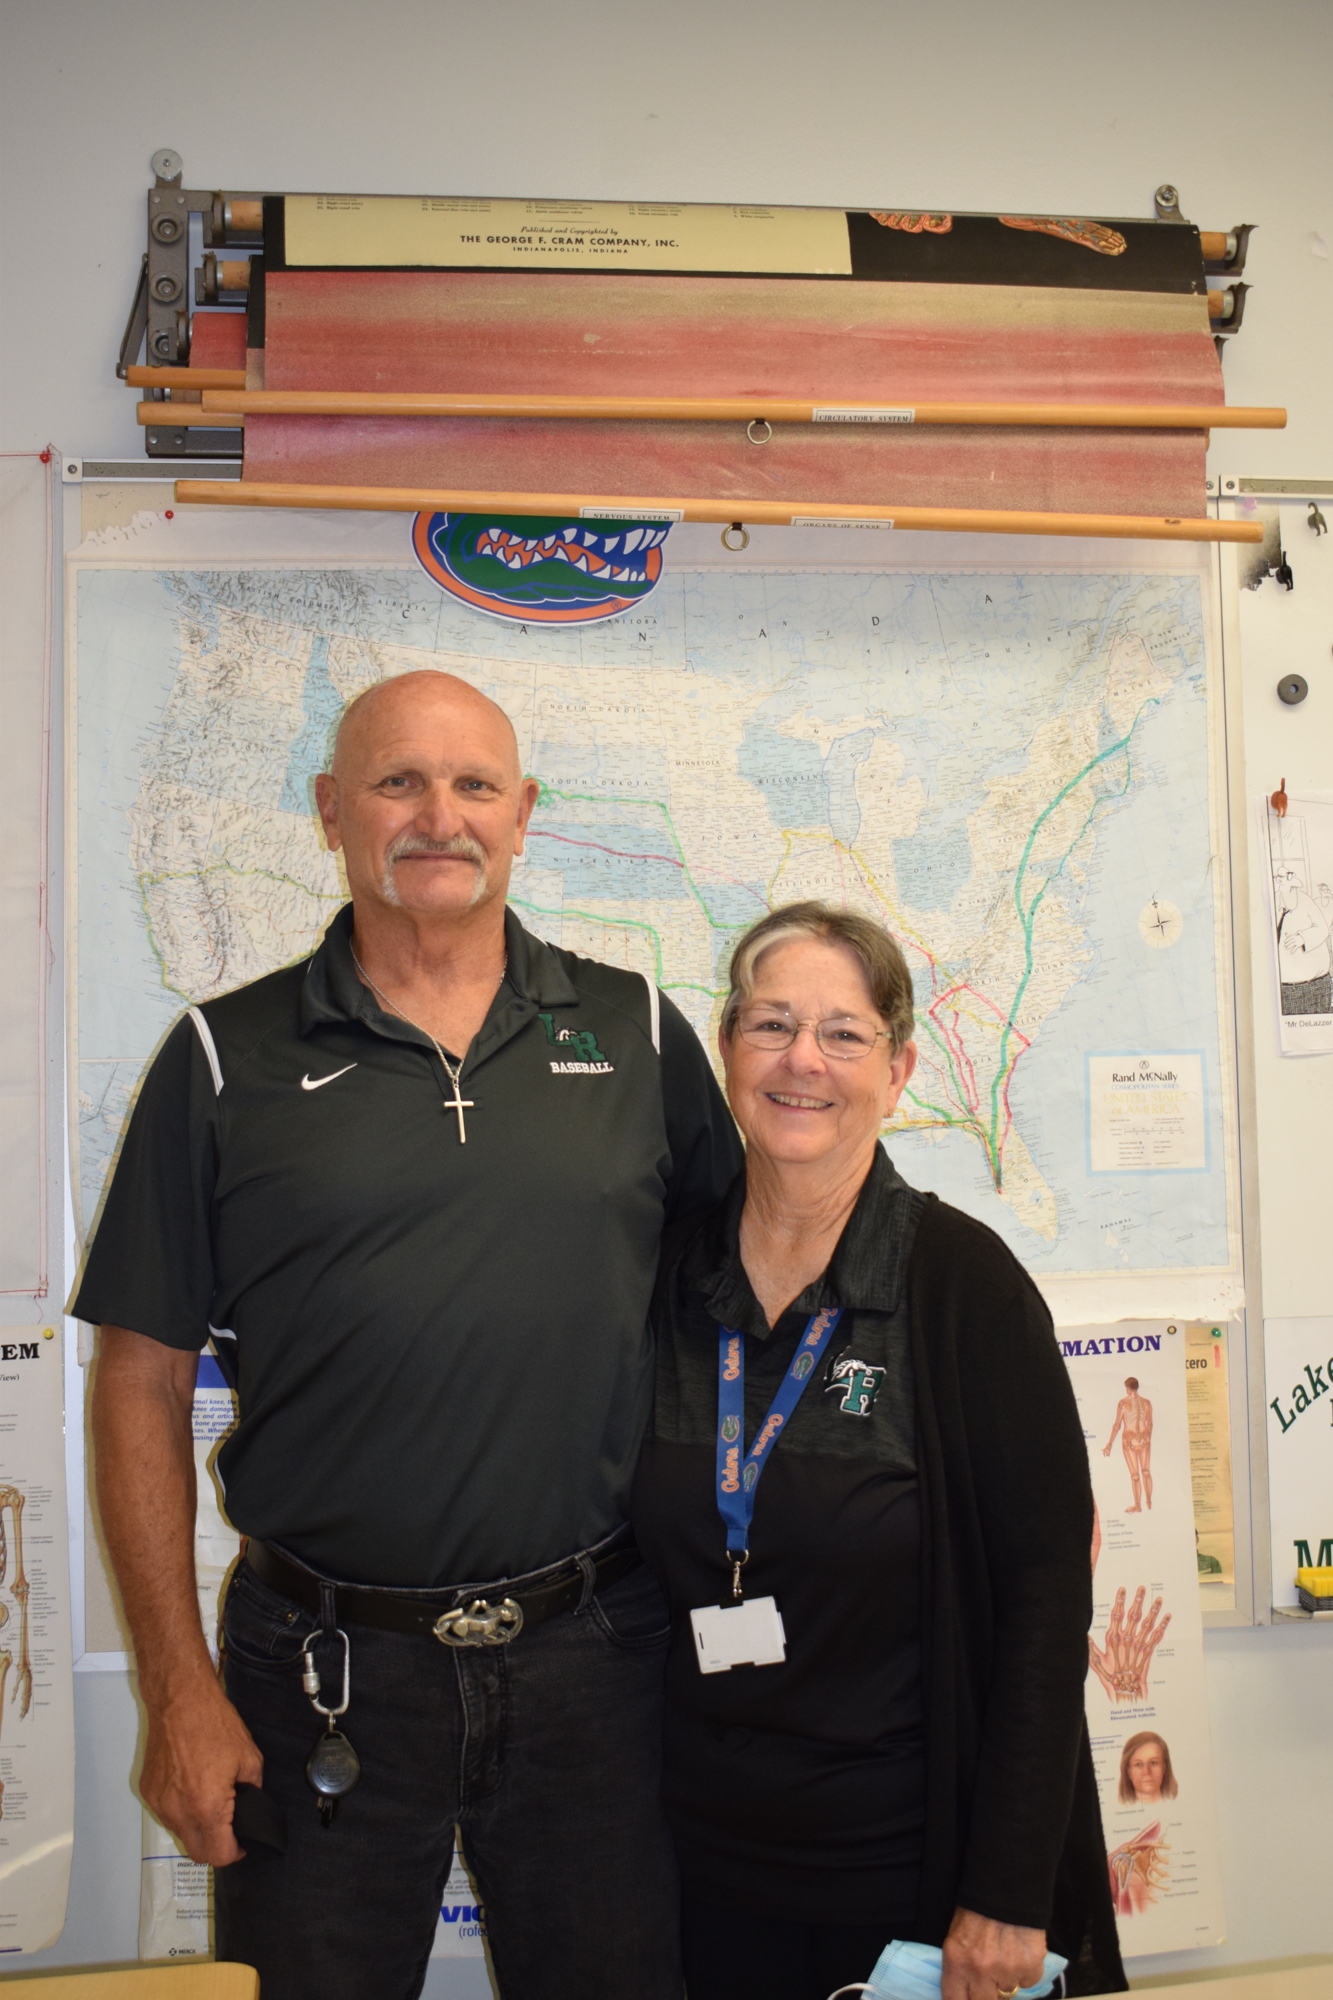 Faust and Candice DeLazzer retire after 46 years teaching in the School District of Manatee County. They spent the past two decades at Lakewood Ranch High School.